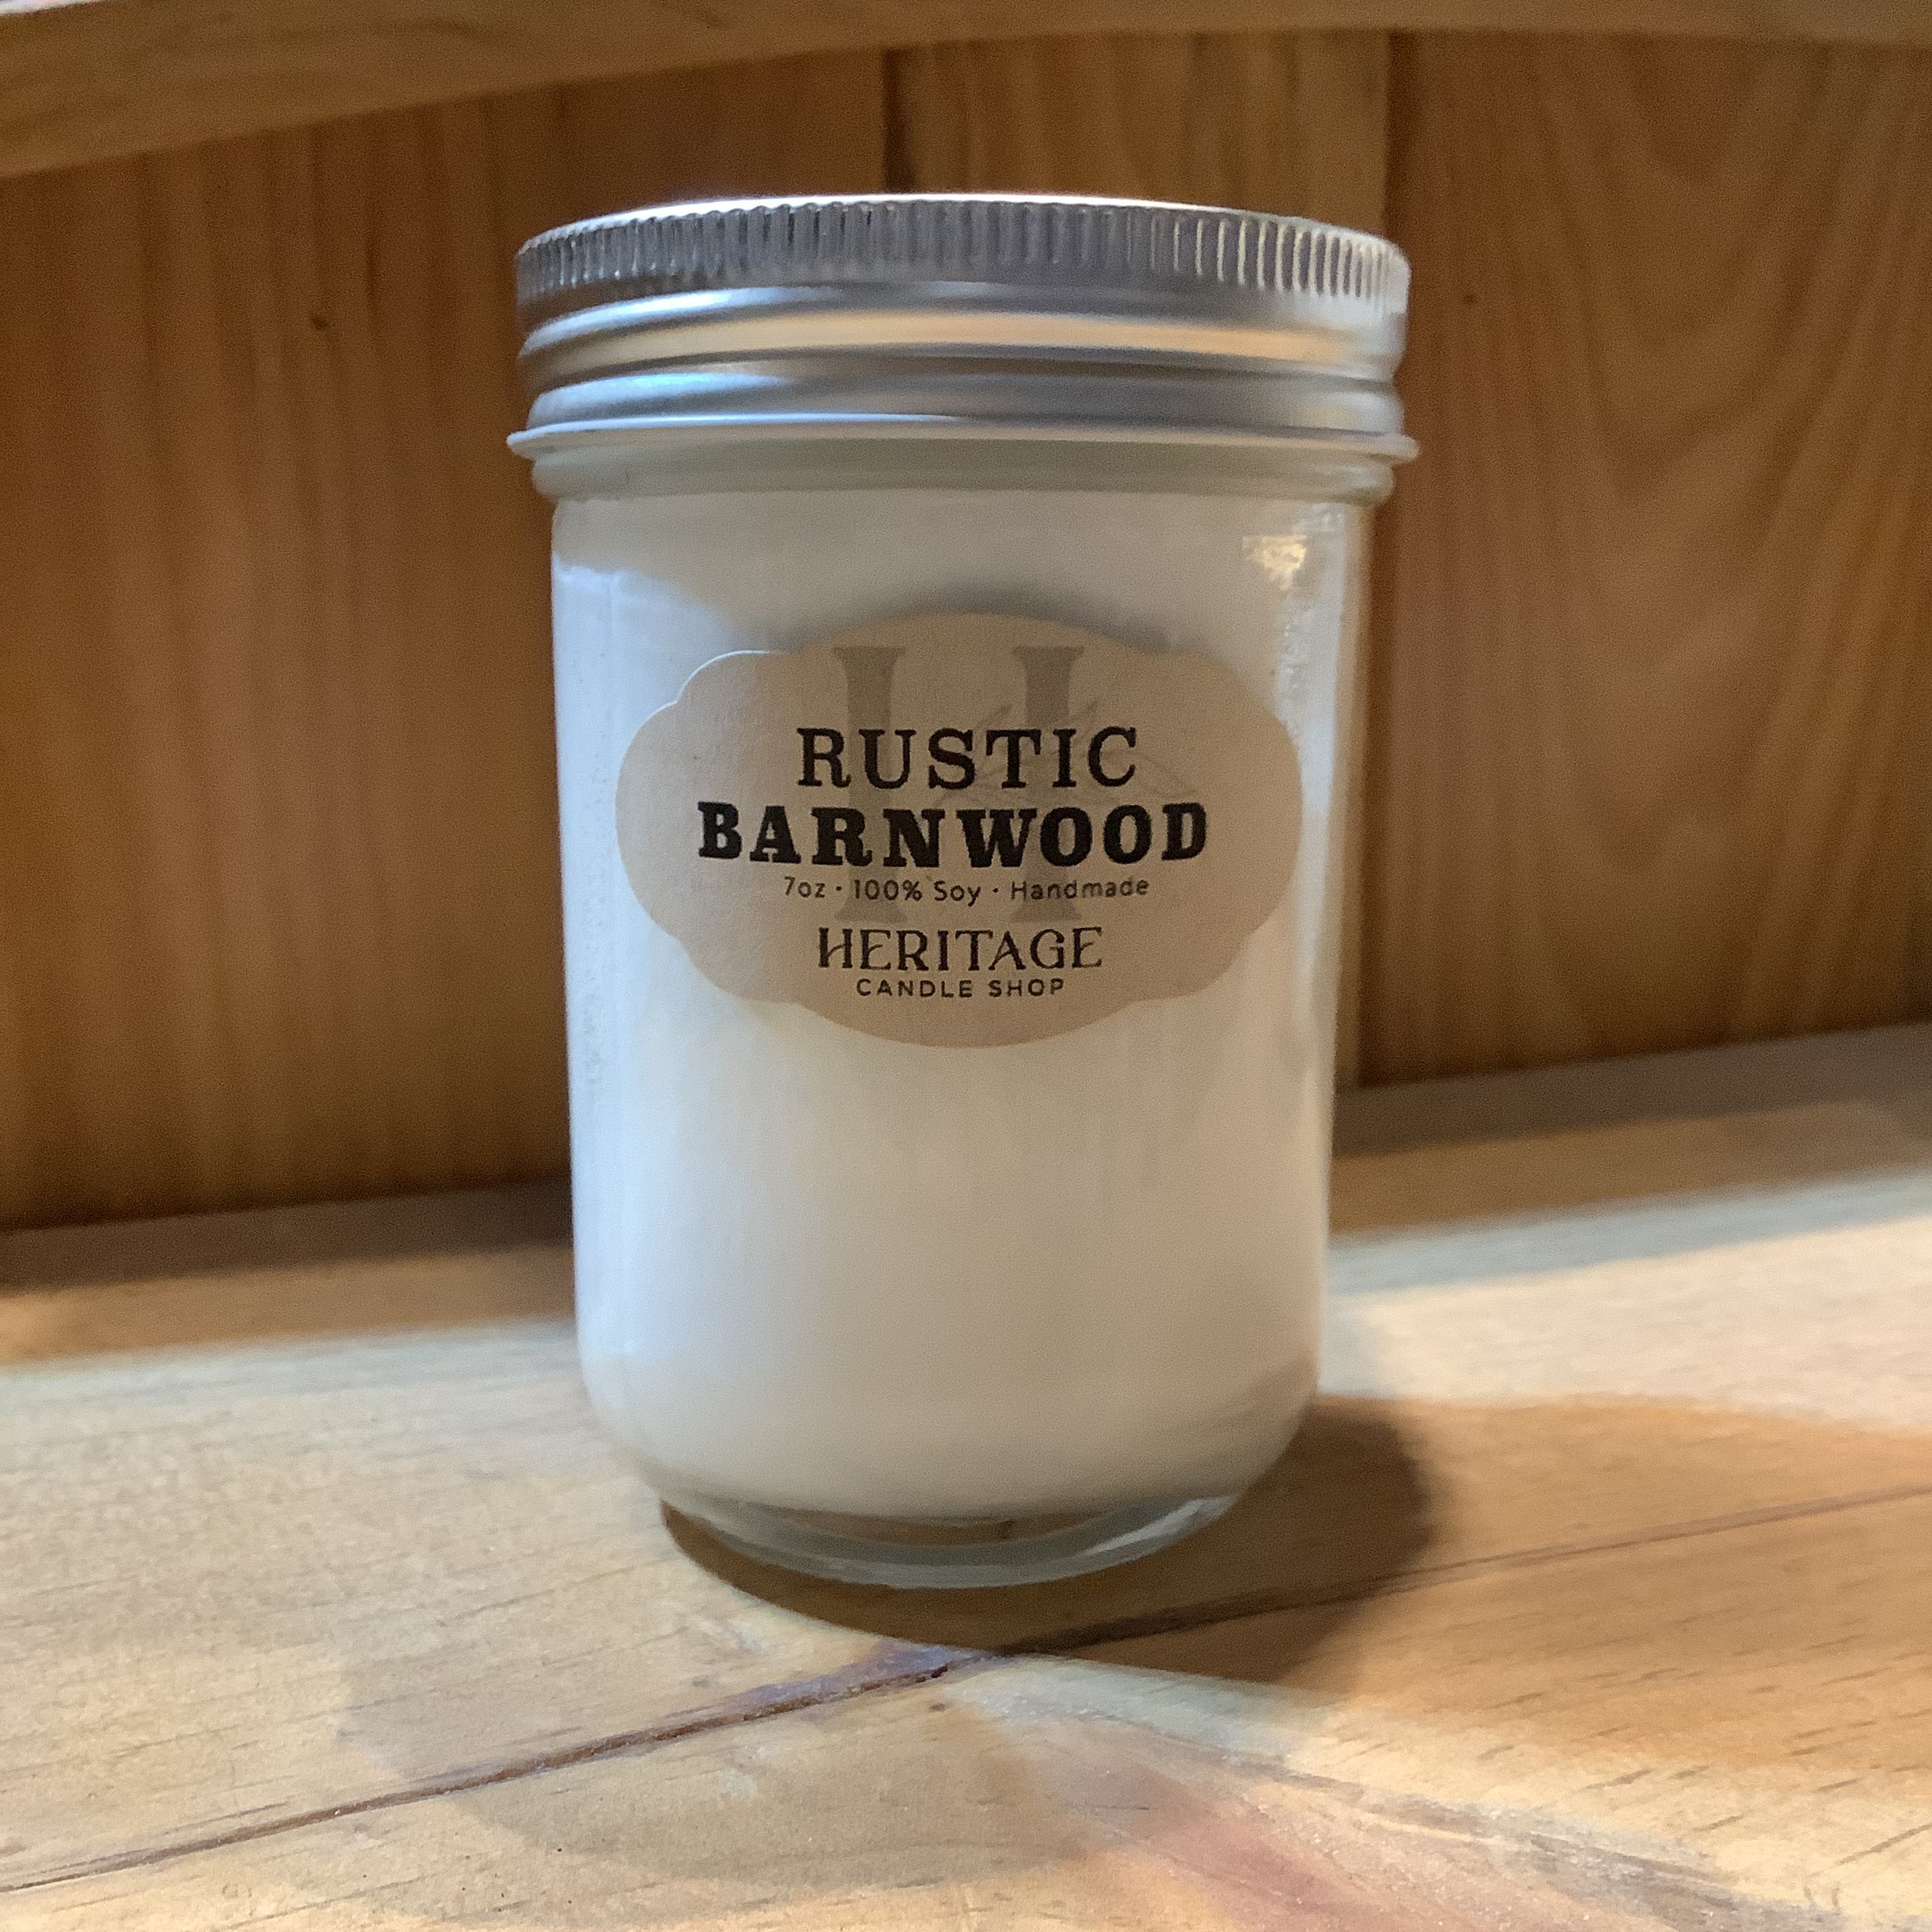 Heritage Candle Shop - Rustic Series